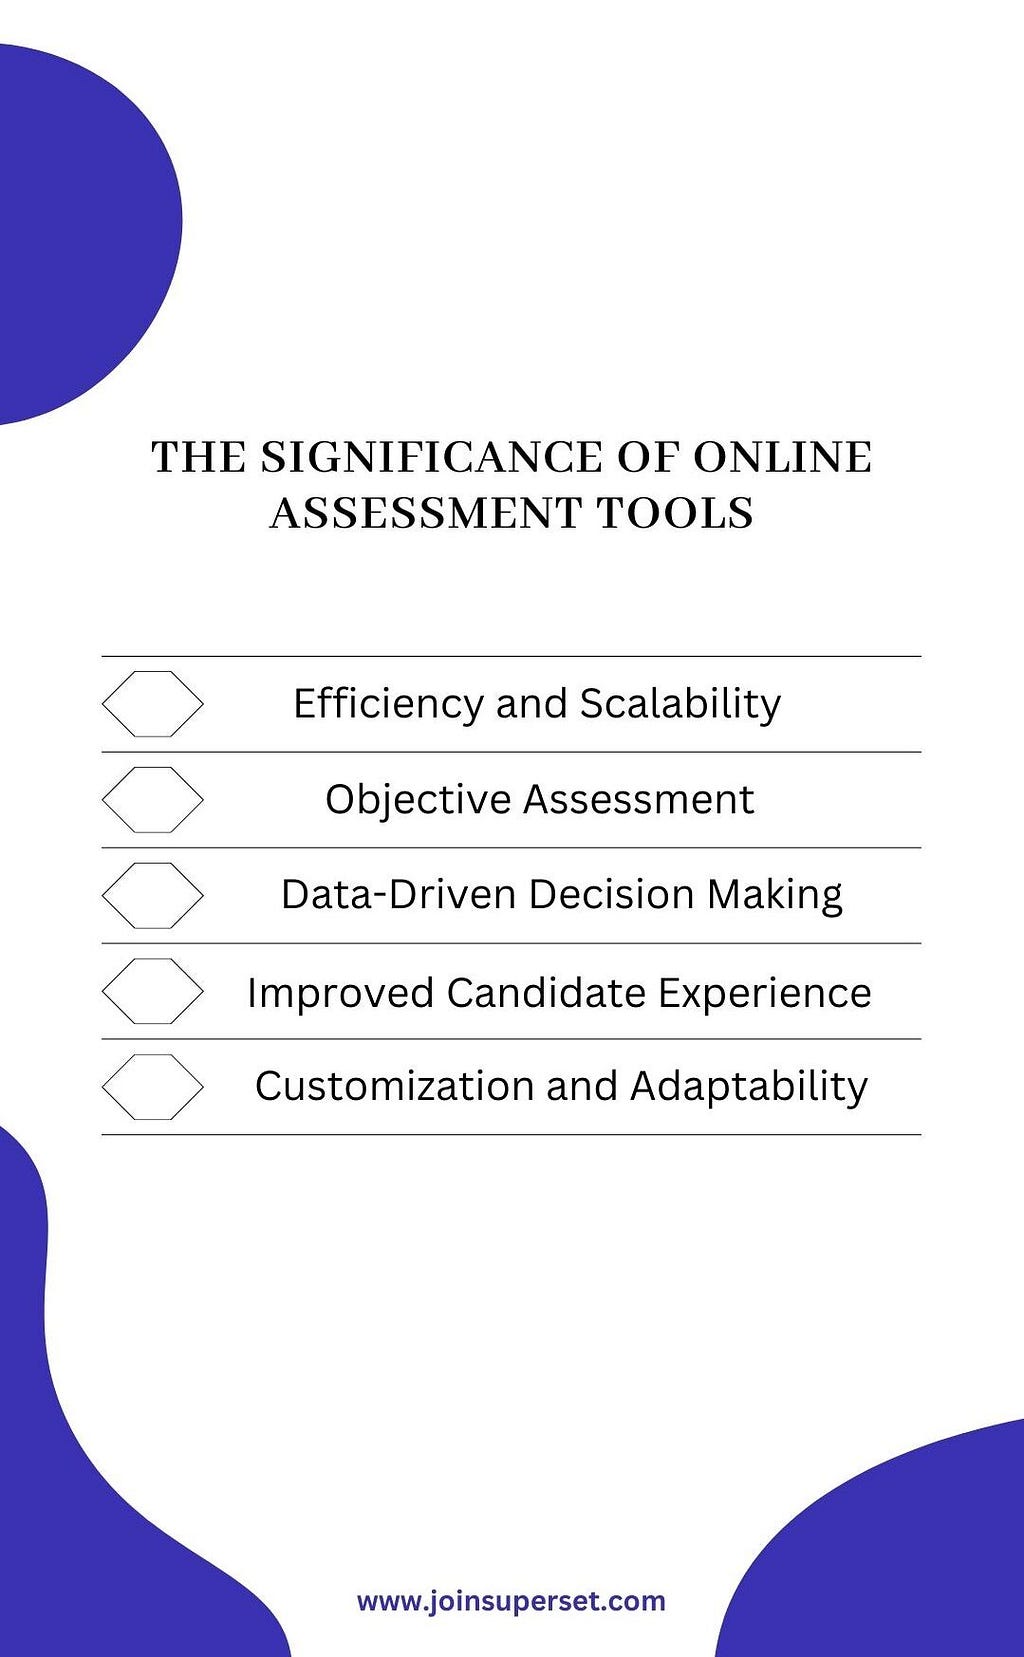 Significance of online assessment tools